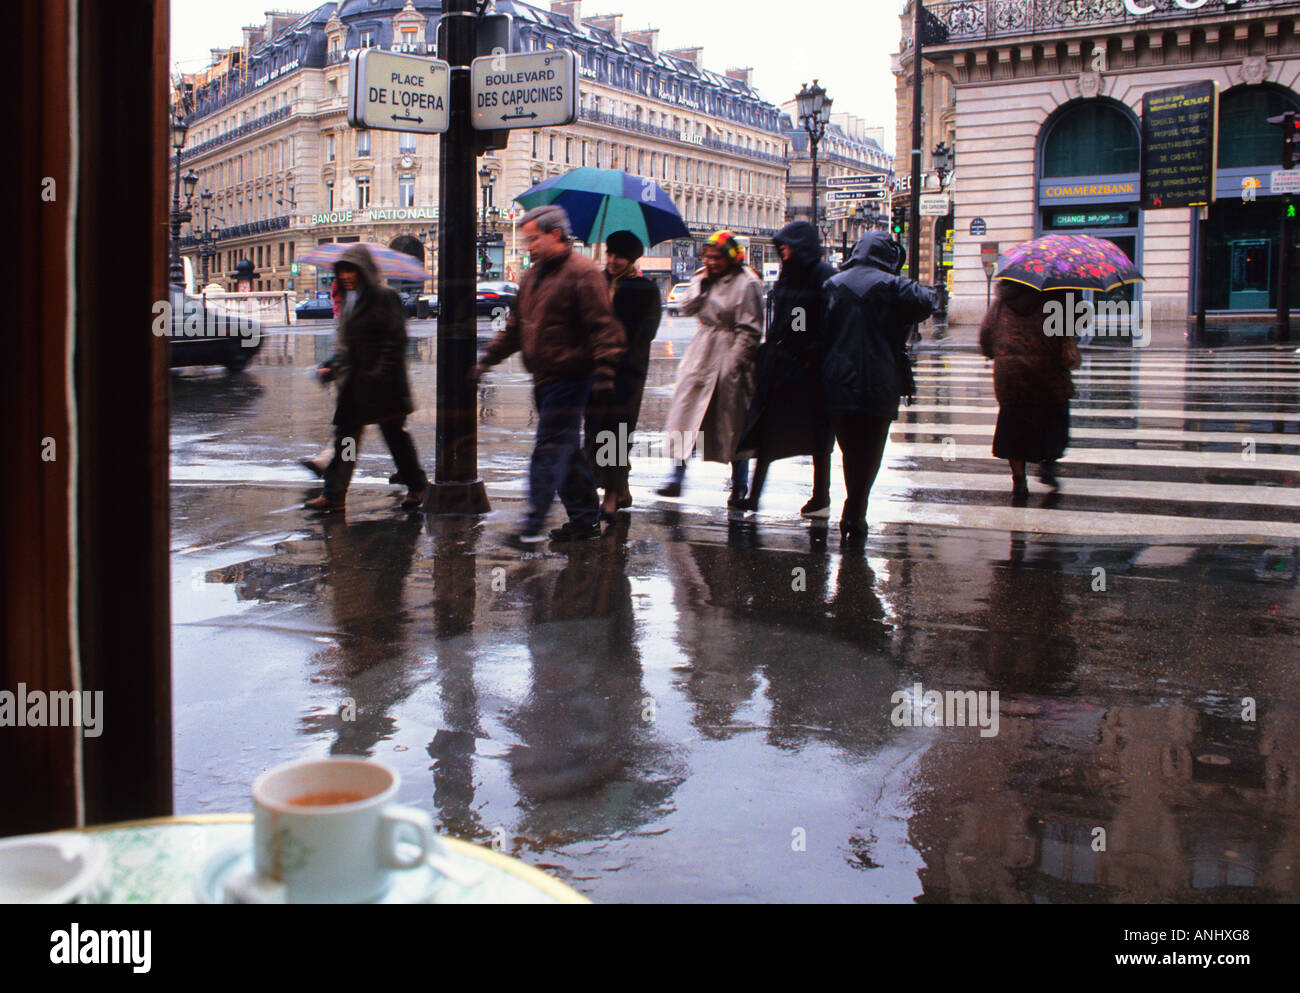 Paris Street Scene On A Rainy Day Looking Out Of A Cafe Window From Inside A Restaurant On The Right Bank People With Umbrellas Crossing The Street Stock Photo Alamy